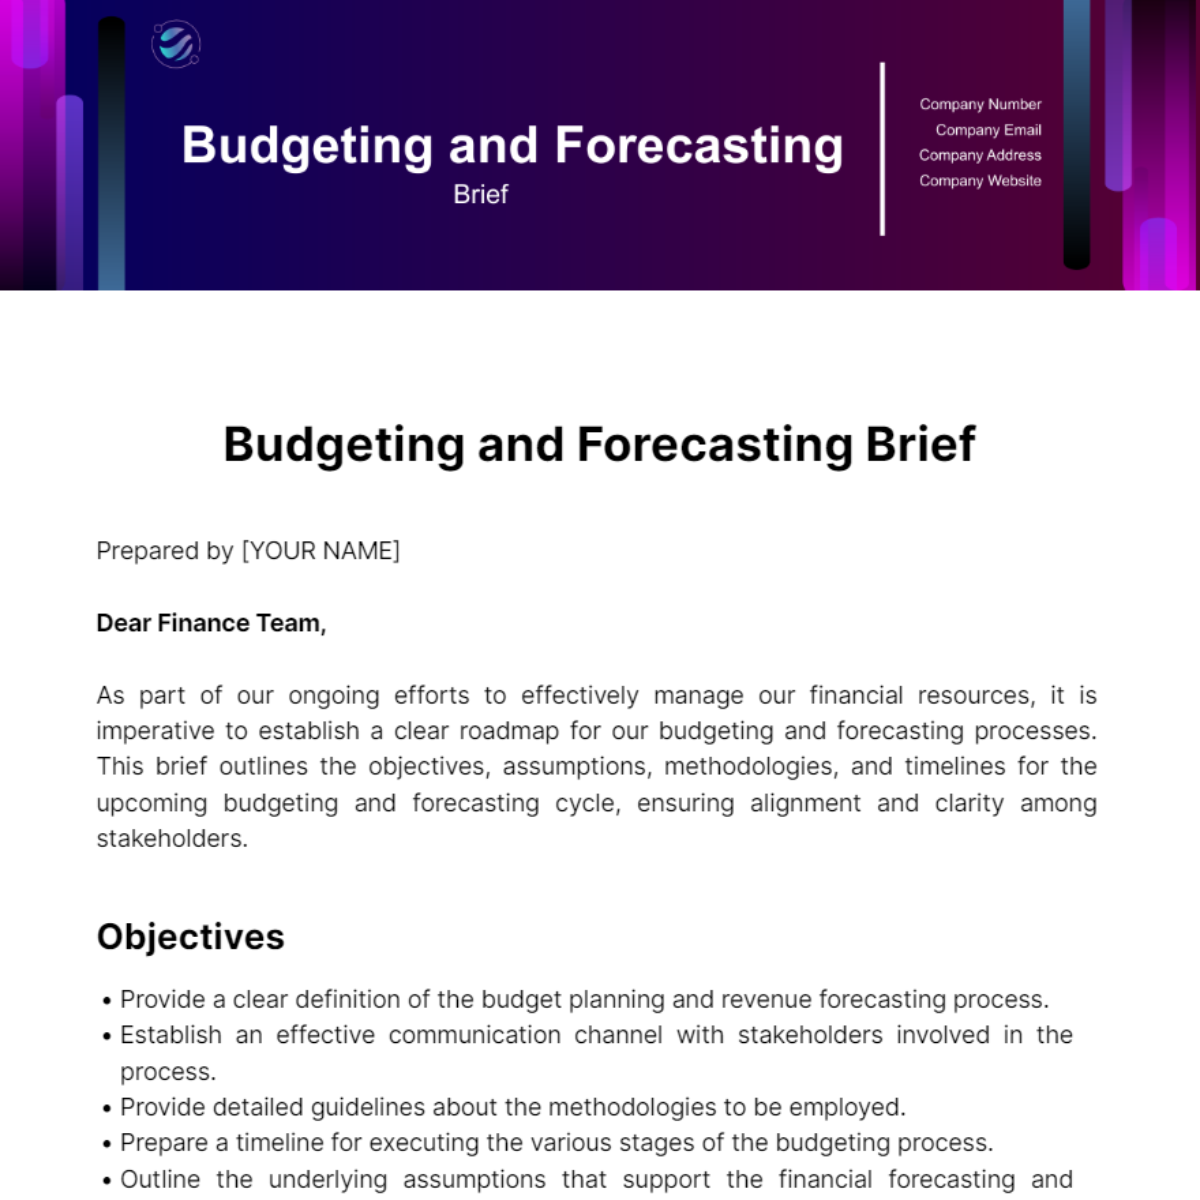 Budgeting and Forecasting  Brief Template